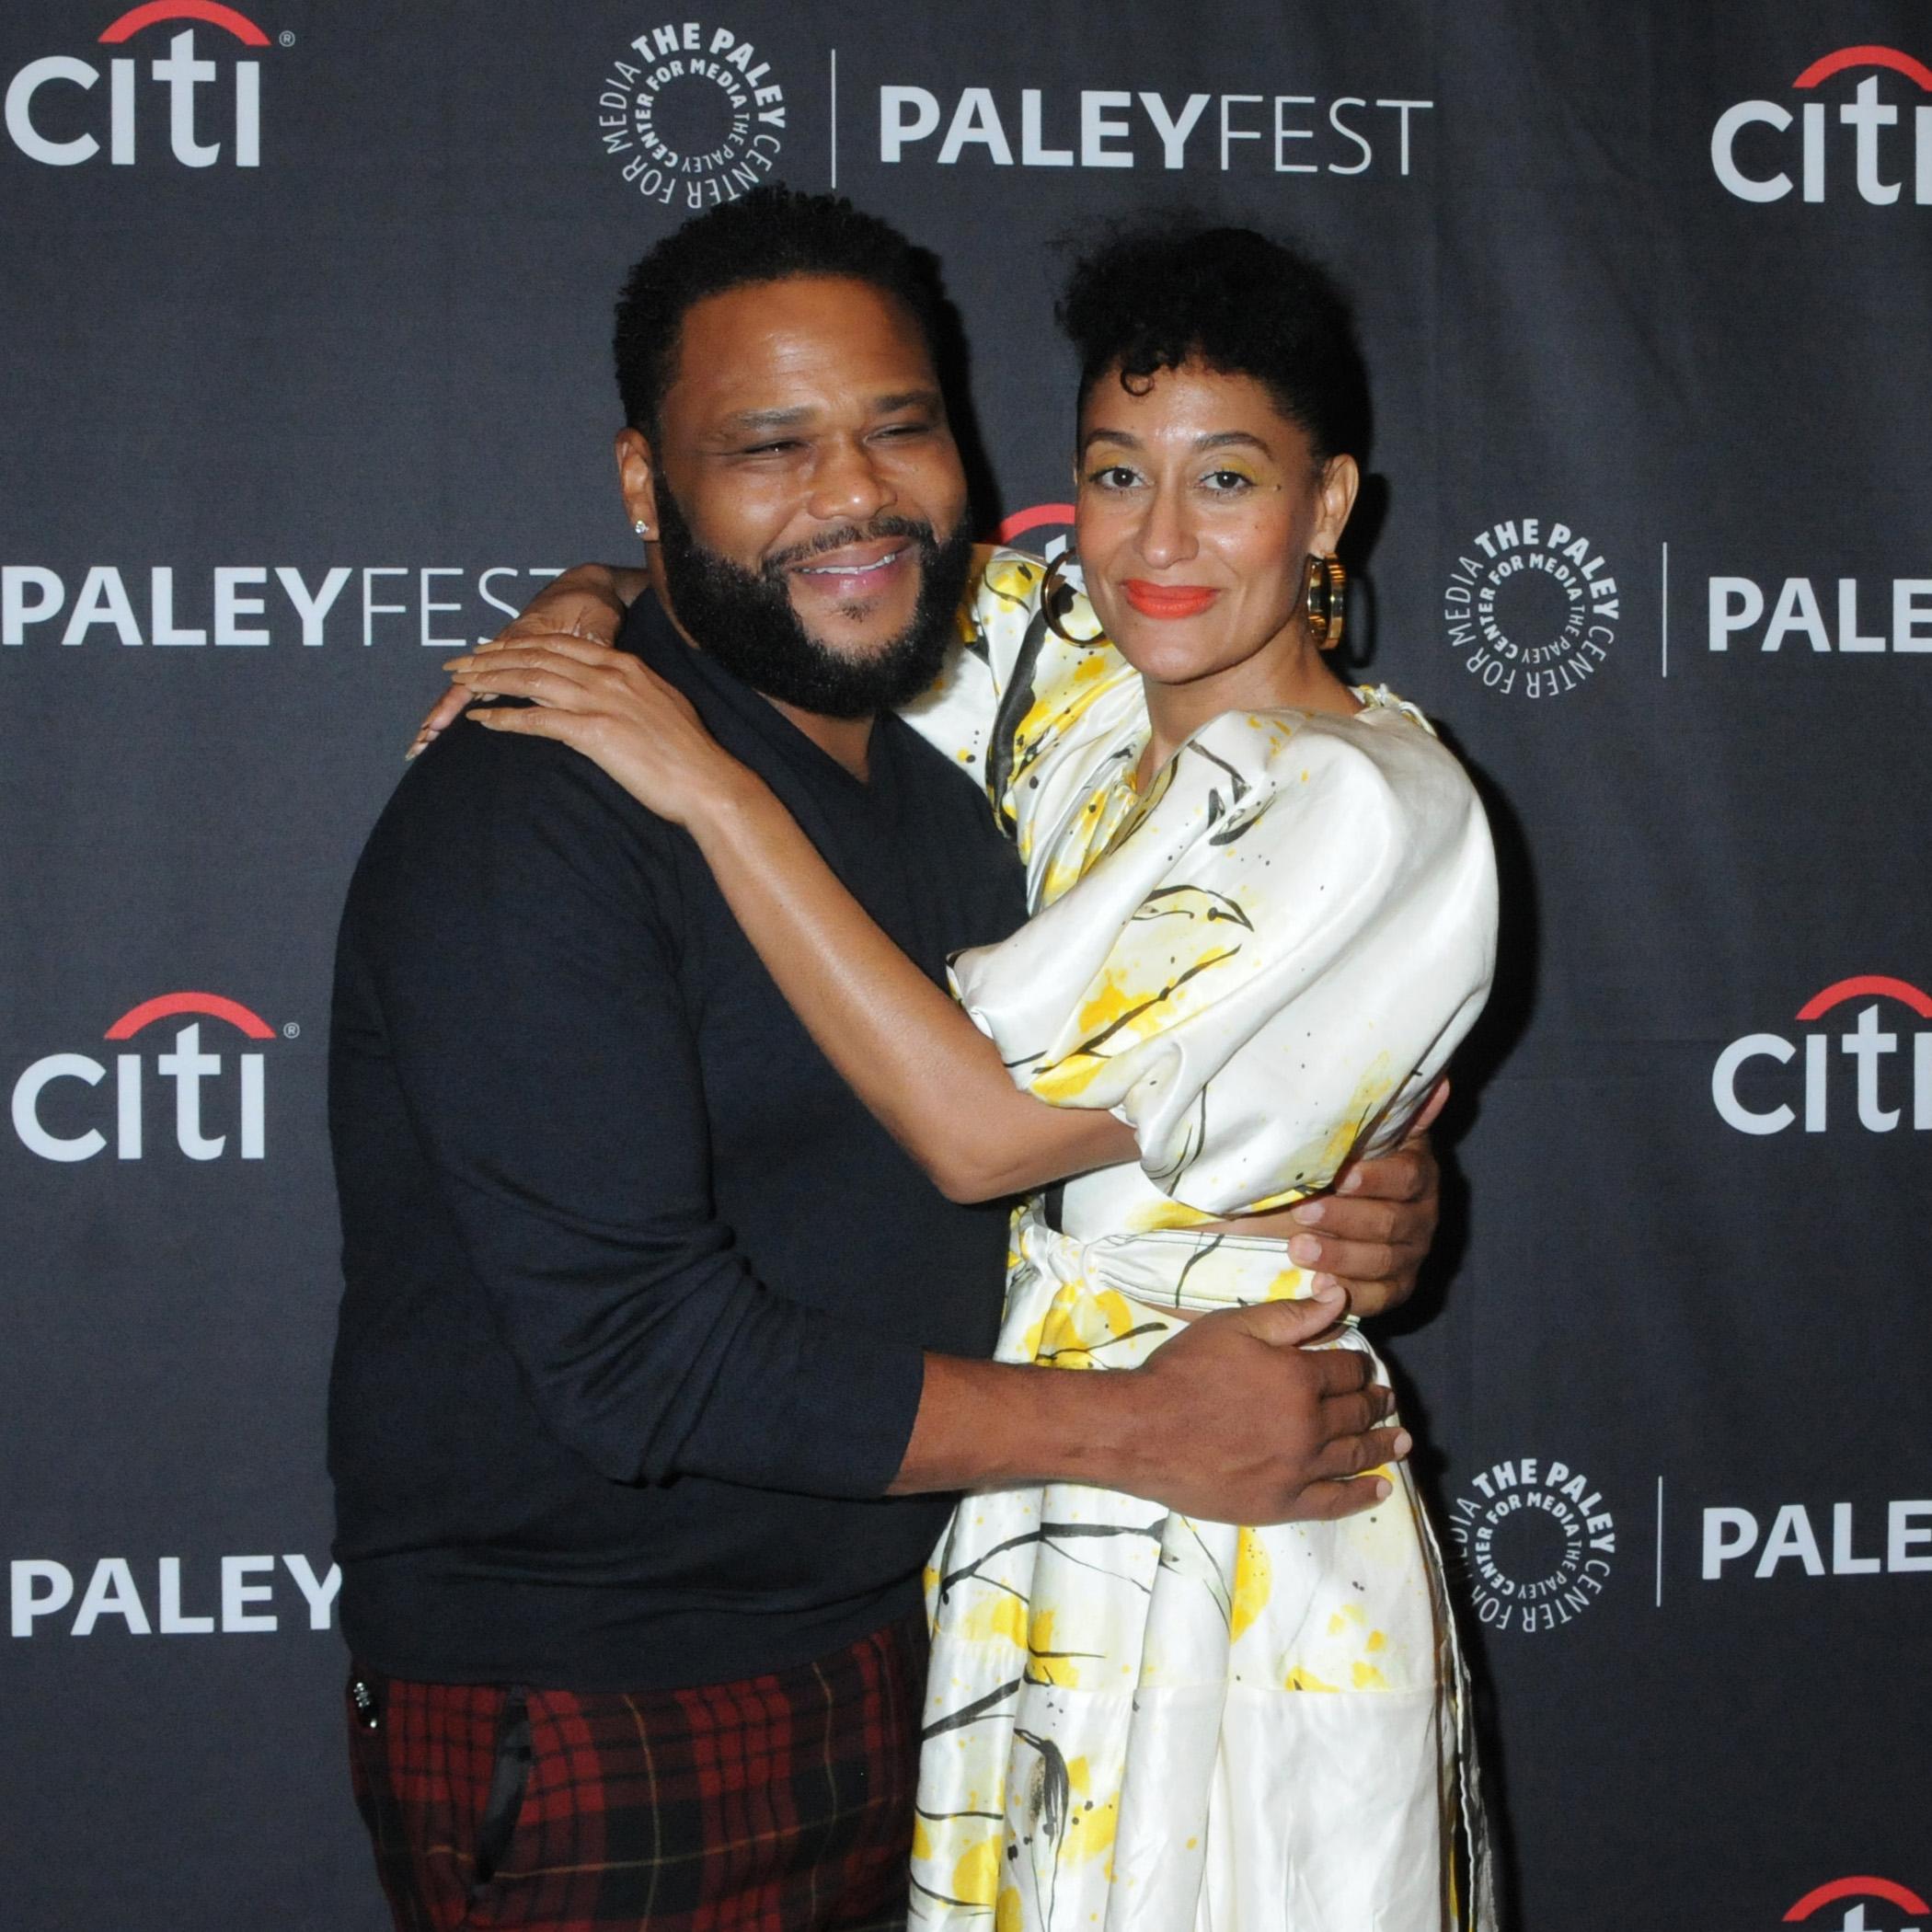 Cast members of "black-ish" arrive for the PaleyFest NY 2019 event for ABC's "black-ish" at the Paley Center for Media NY in New York.